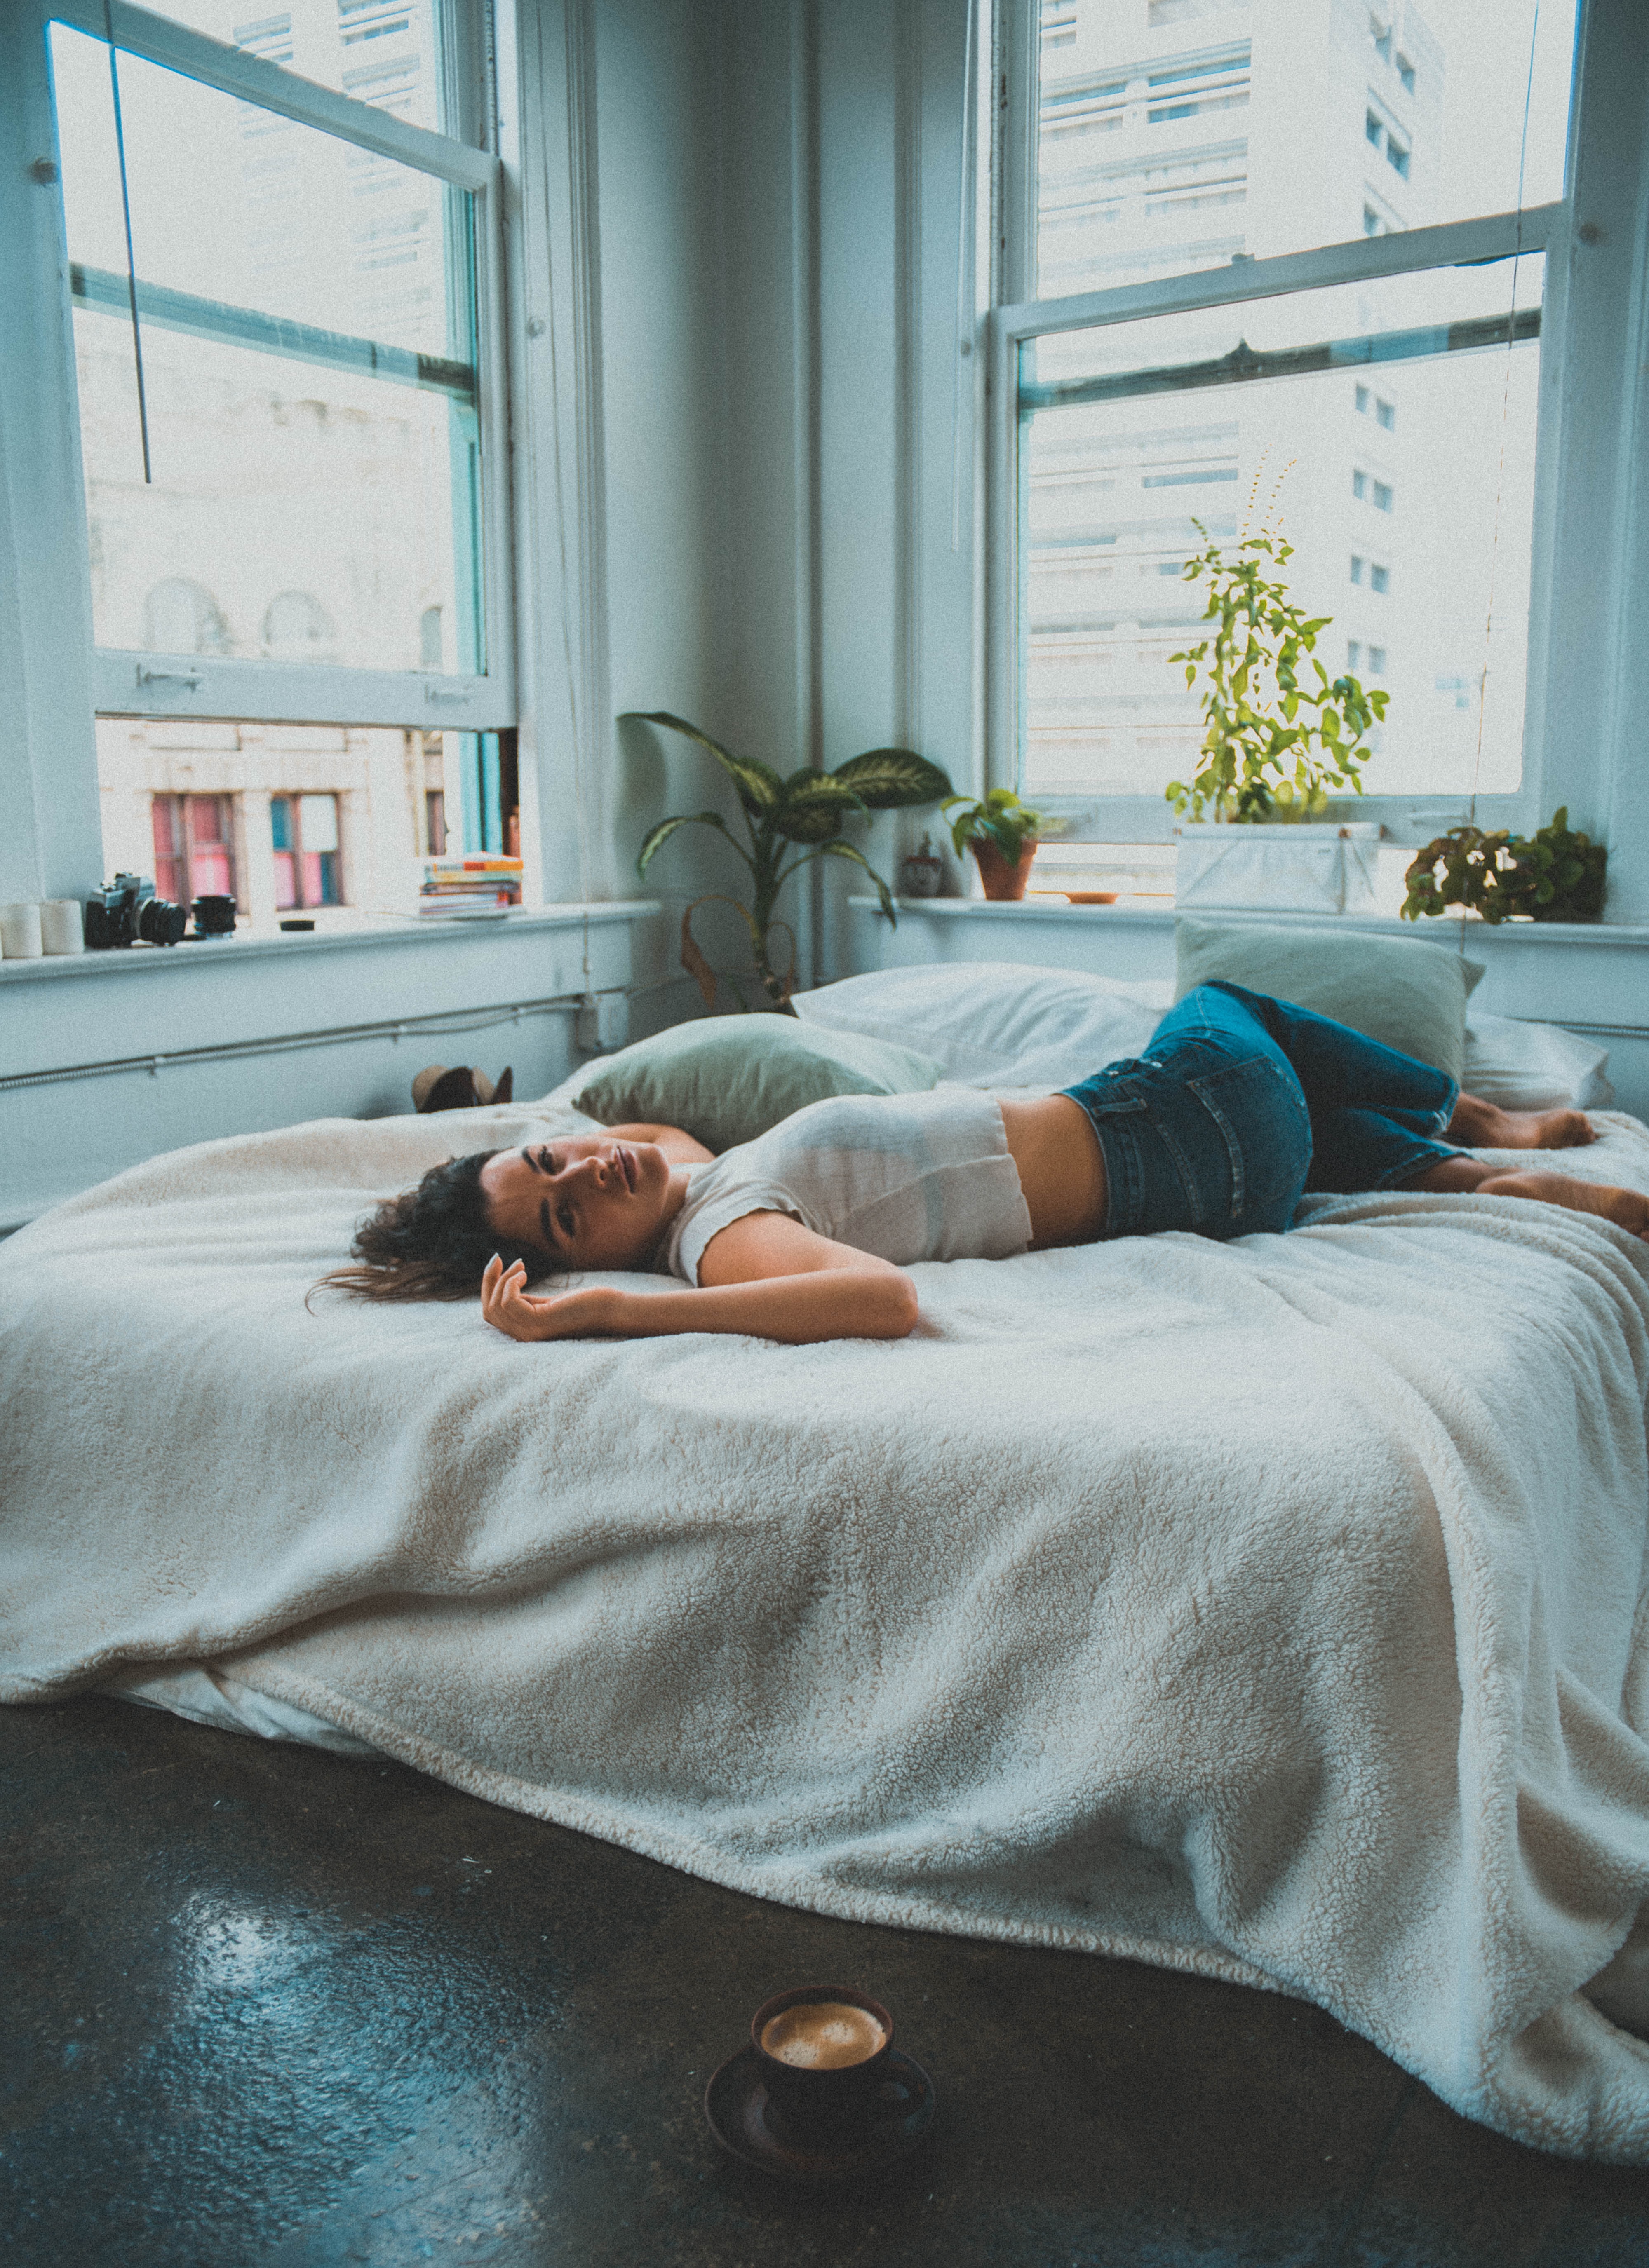 An woman lying in bed.│Source: Unsplash